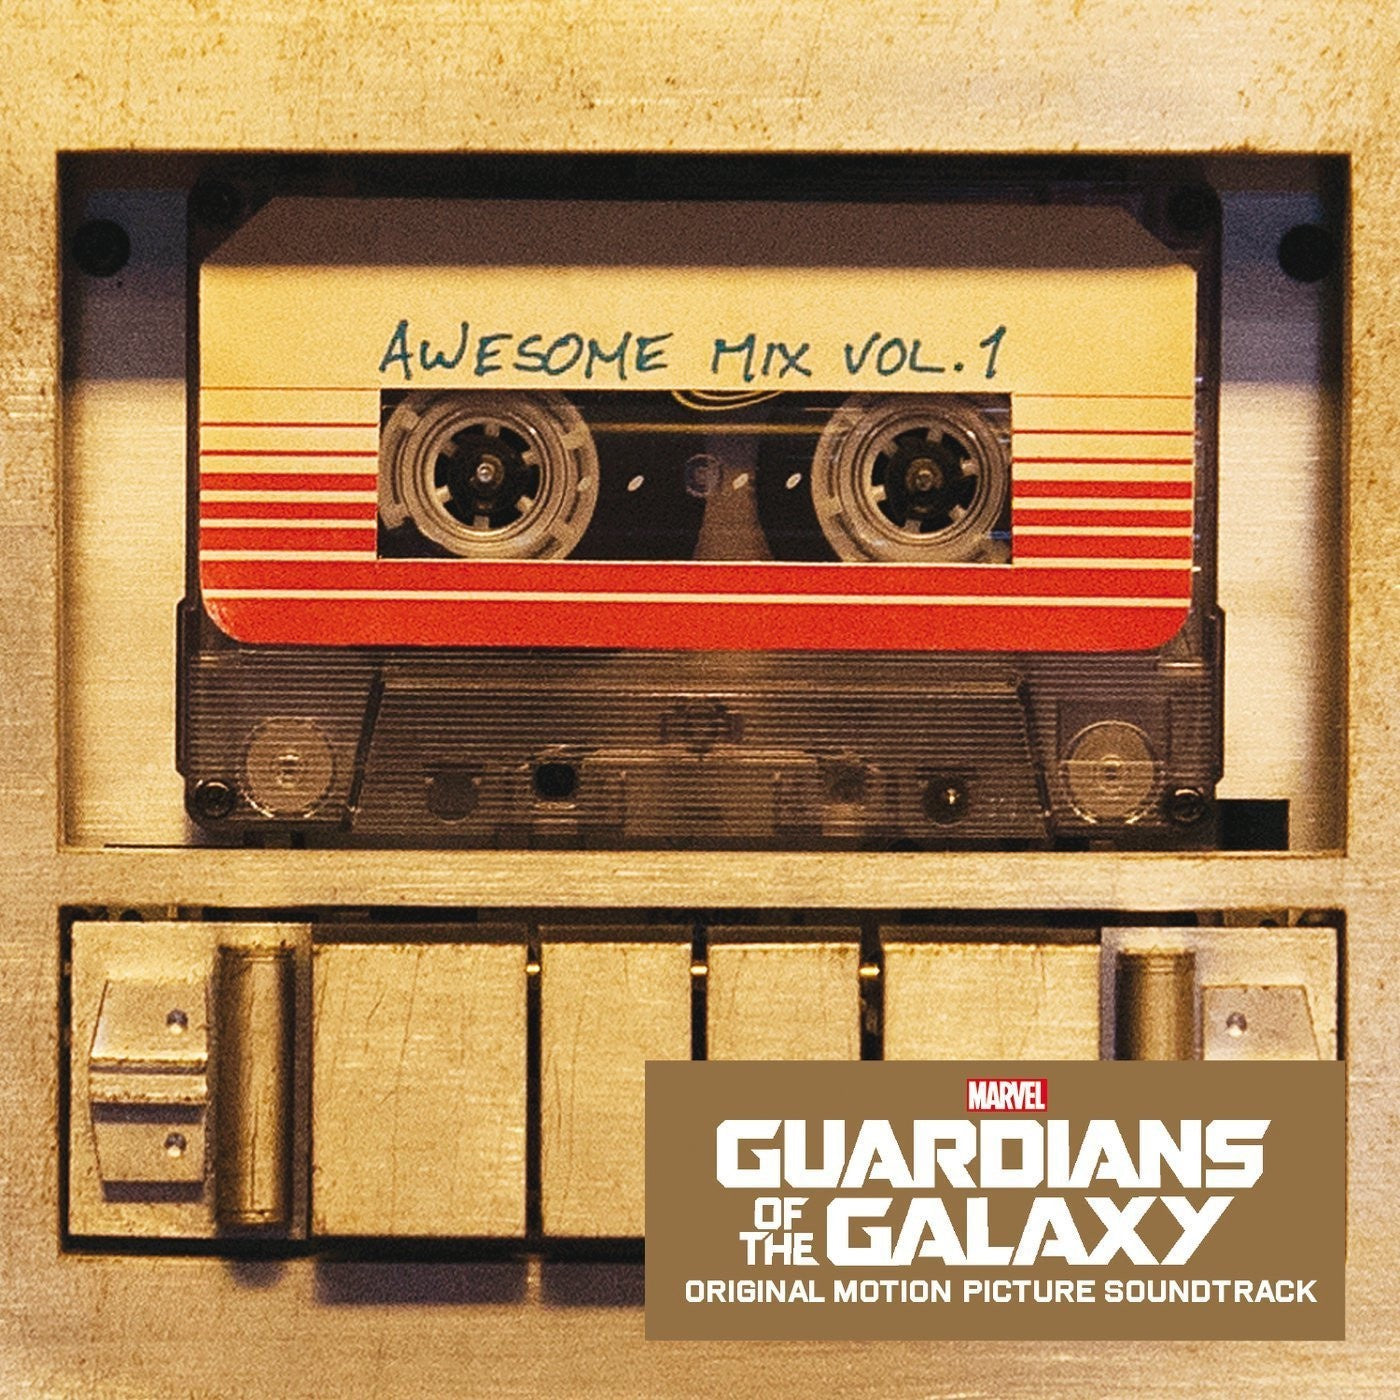 Vinyl record of the 'Guardians of the Galaxy: Awesome Mix Vol. 1' original soundtrack album